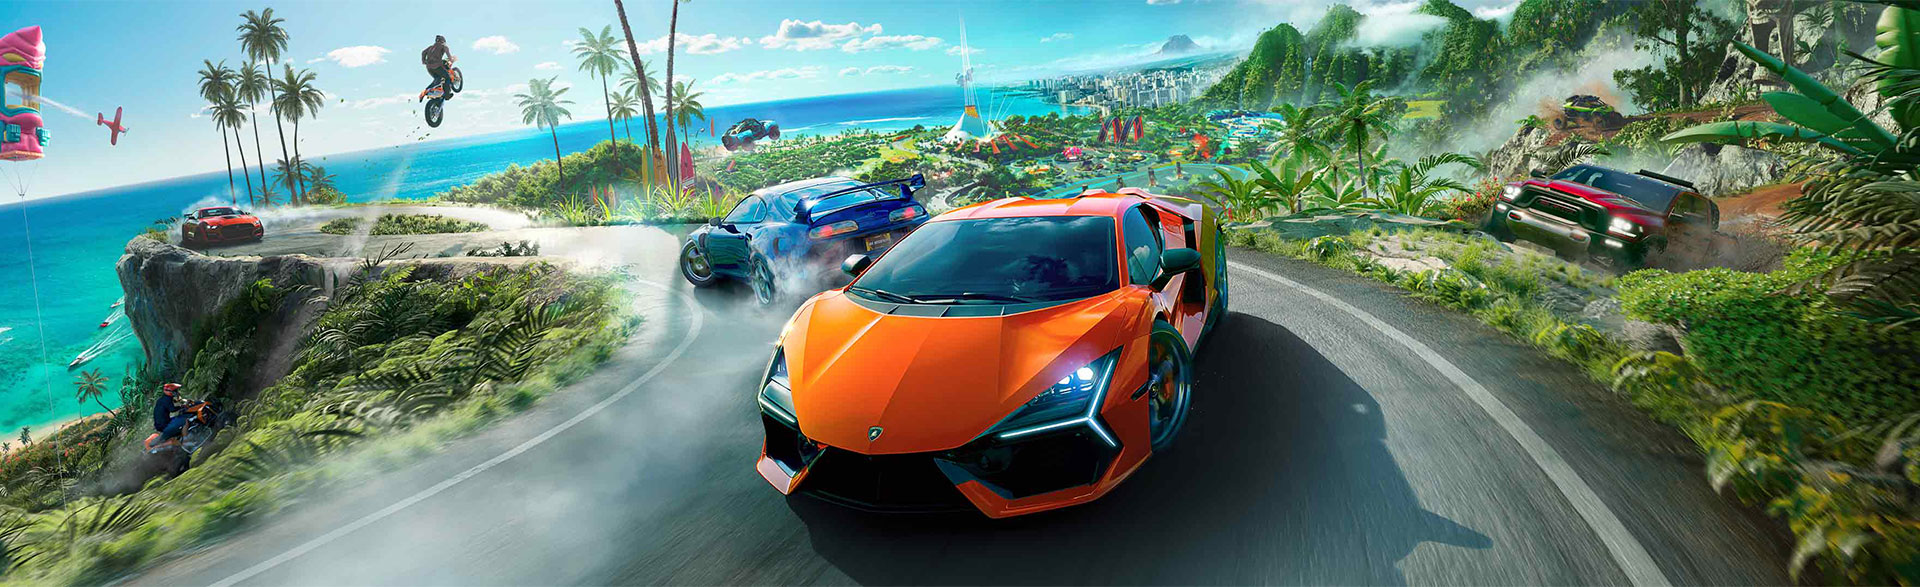 The Crew 2 - Digital Standard Edition (Simplified Chinese, English